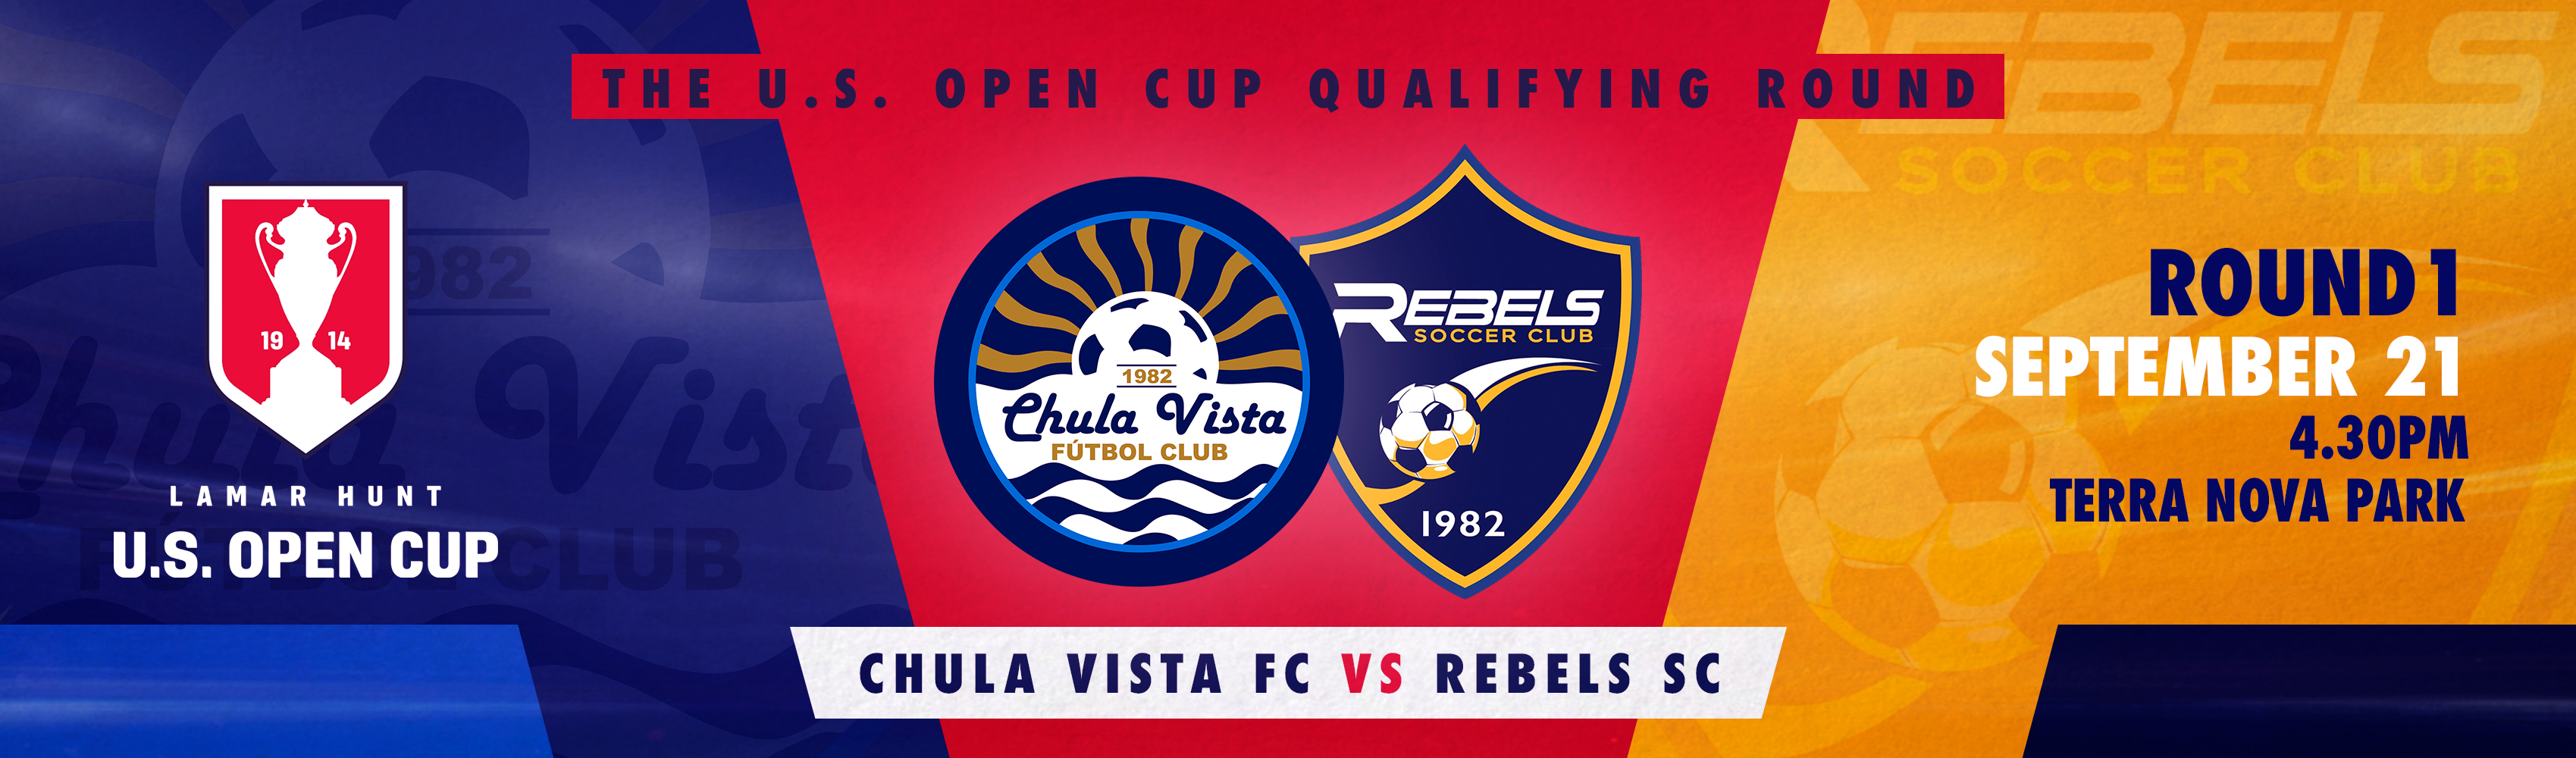 Chula Vista FC Set for First Round of the Open Cup Qualifiers